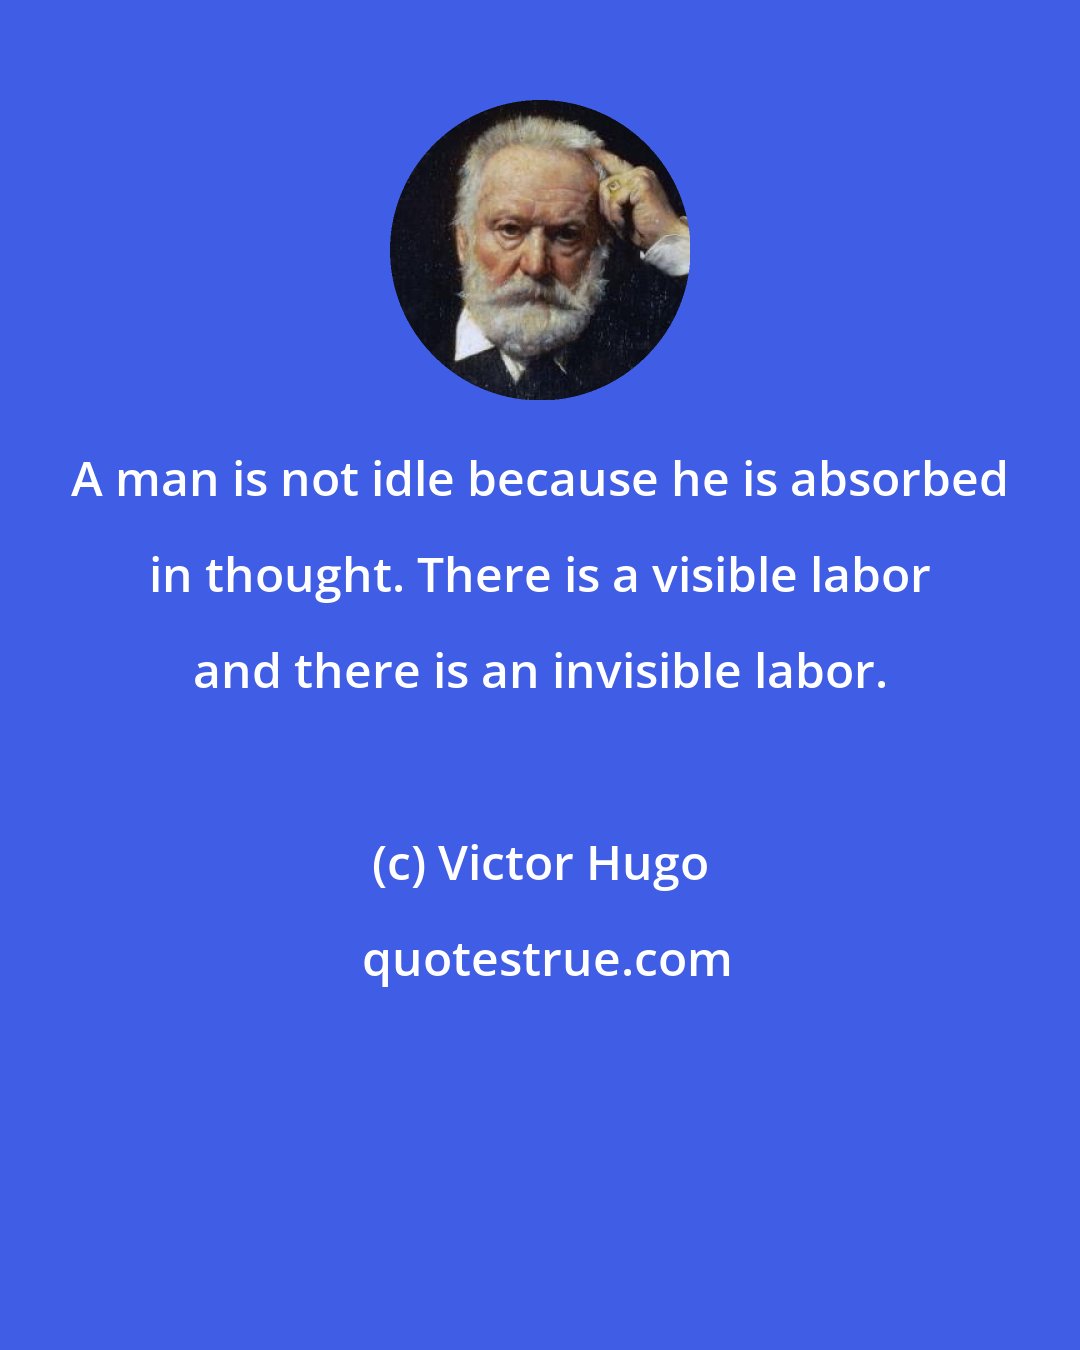 Victor Hugo: A man is not idle because he is absorbed in thought. There is a visible labor and there is an invisible labor.